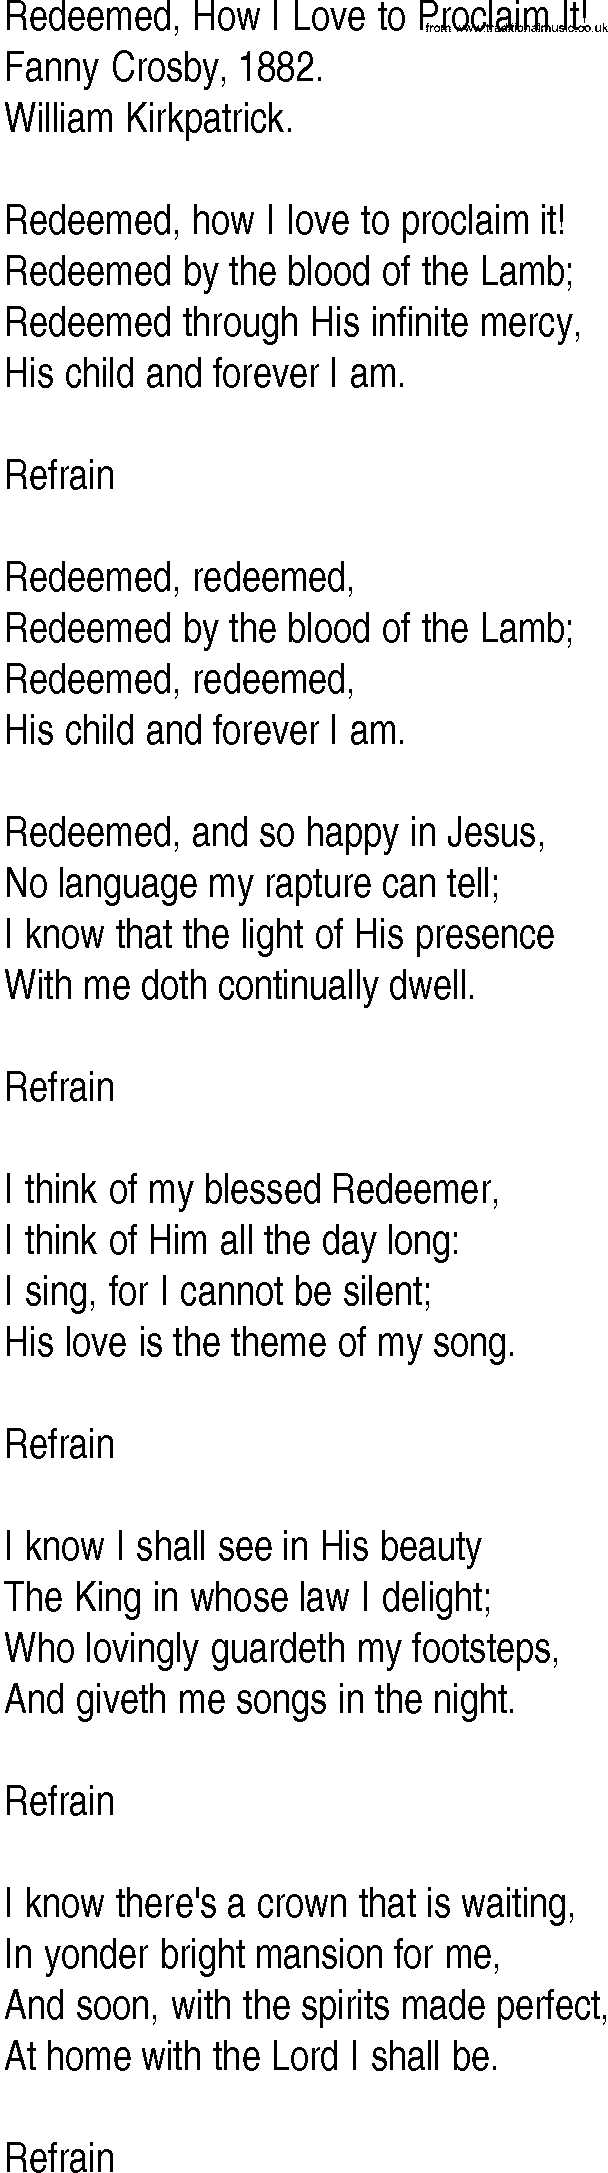 Hymn and Gospel Song: Redeemed, How I Love to Proclaim It! by Fanny Crosby lyrics